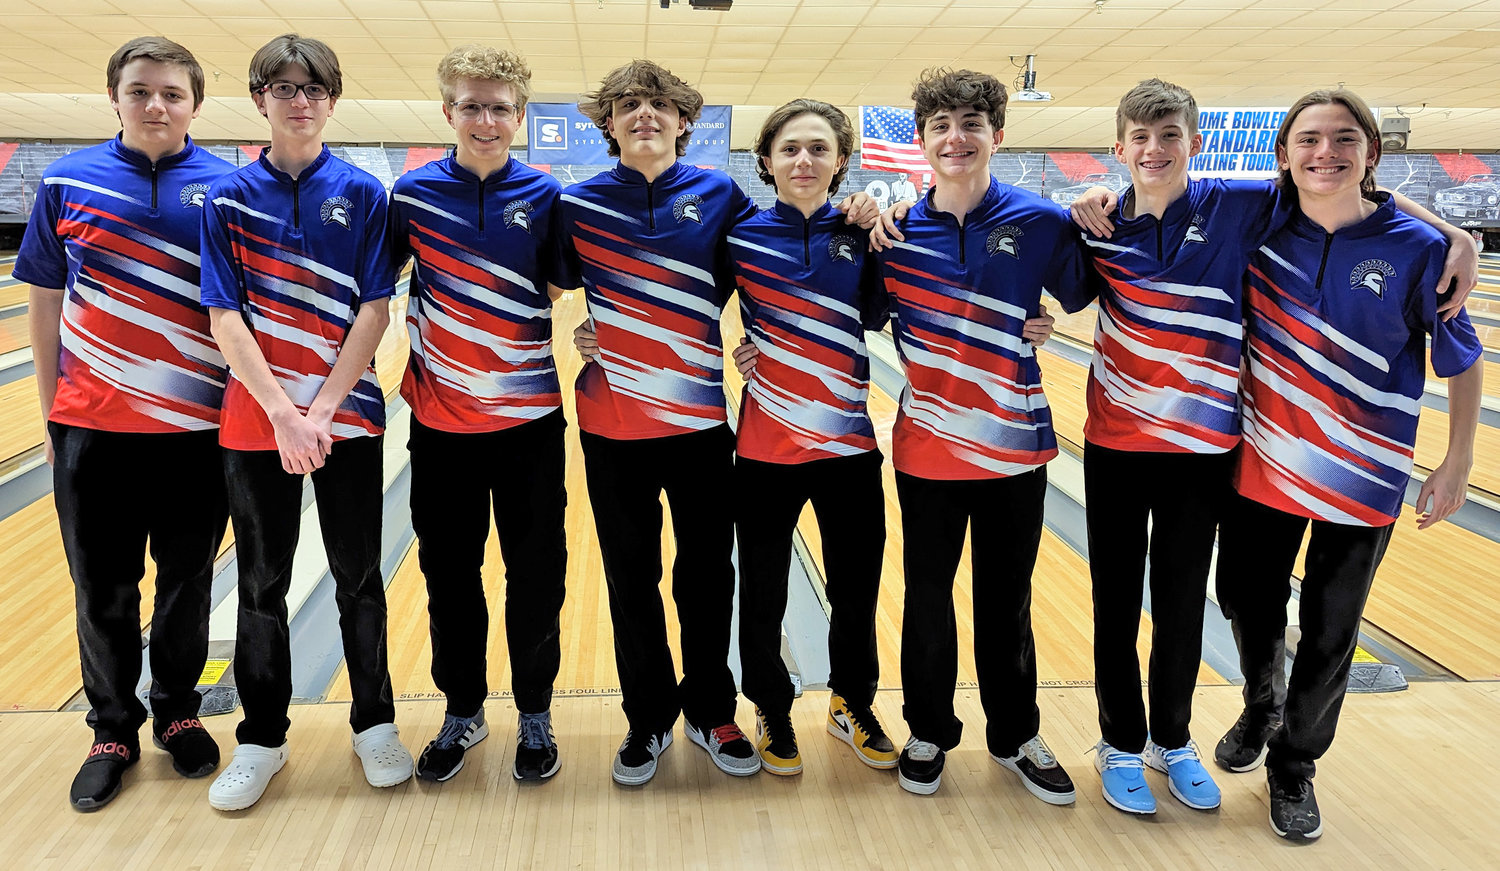 The New Hartford boys bowling team defended its Section III Class B title and won the Division 1 category at the Section III Championship at Strike ‘n Spare Lanes in Mattydale last weekend. The win qualified the Spartans for the state tournament March 10 at the same location. From left: CJ Fletcher, Nick Bennett, Brendan Krol, Trevor Cyr, Andrew Cyr, Raymond Cyr, JP Lazzaro and Zack Pazik.